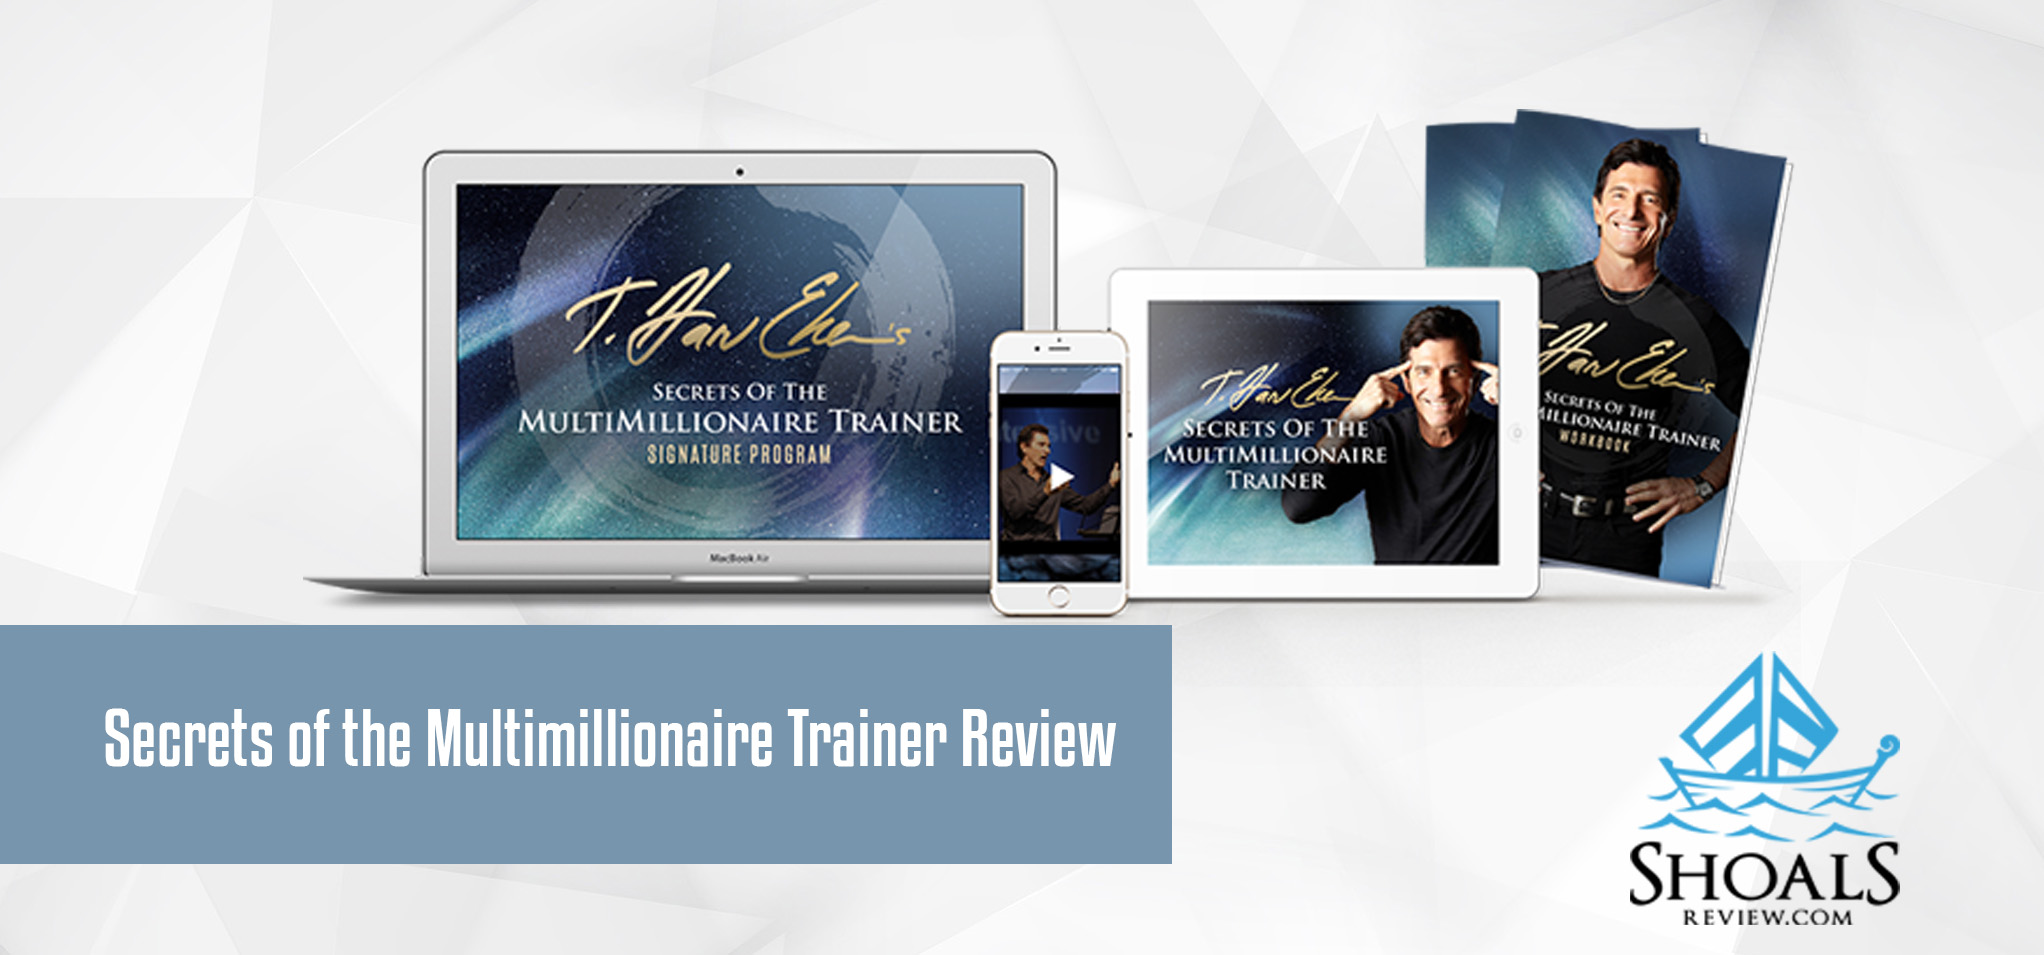 Secrets of the MultiMillionaire Trainer Review by T Harv Eker – Does It Work?